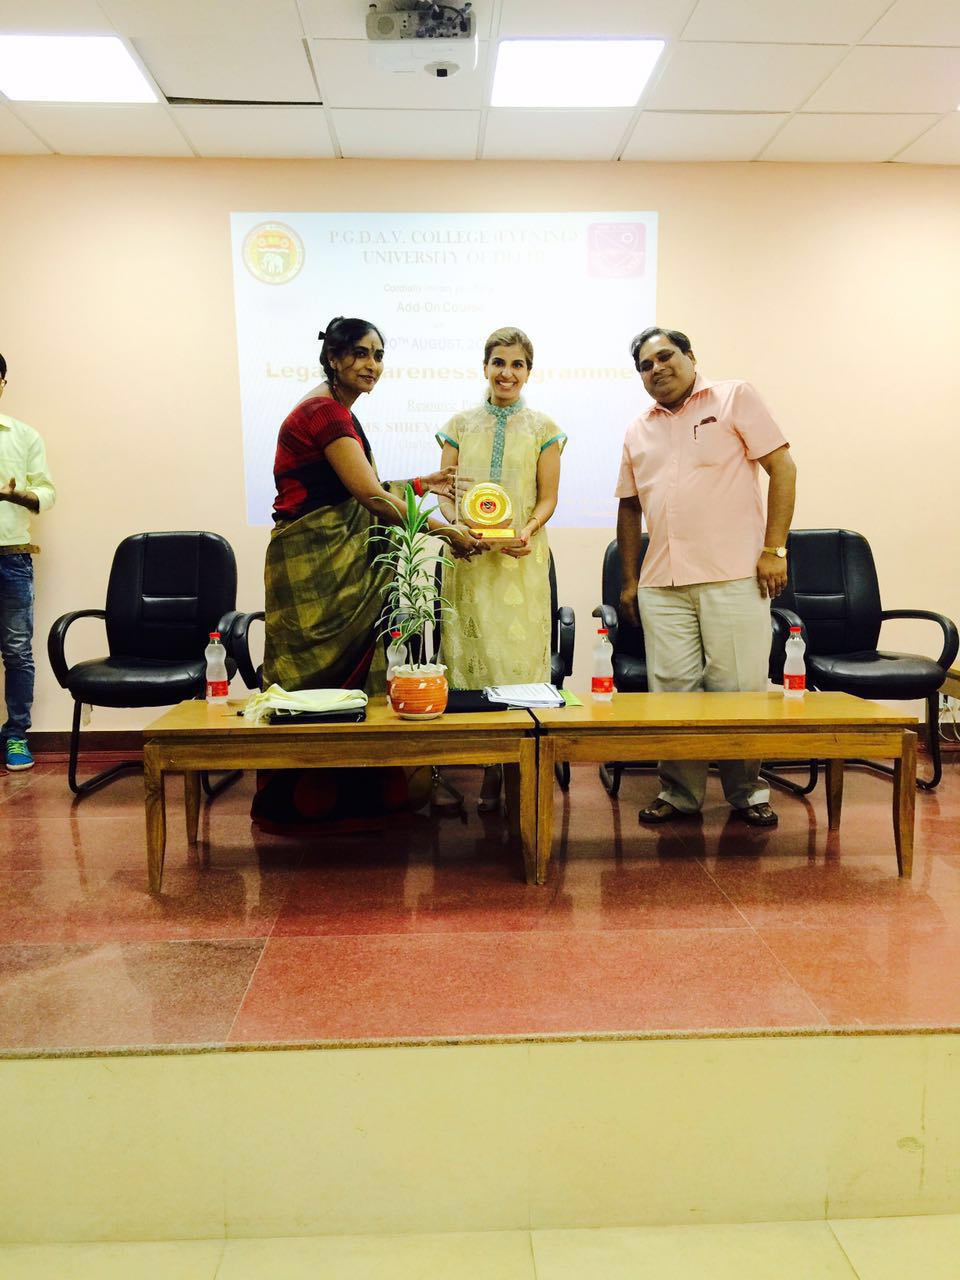 AS A PART OF CERTIFICATE COURSE DLSA, SOUTH ORGANISED A SESSION AT PGDAV COLLEGE ON 20.08.2016 CONDUCTED BY MS. SHREYA ARORA, SECRETARY, DLSA (SOUTH)